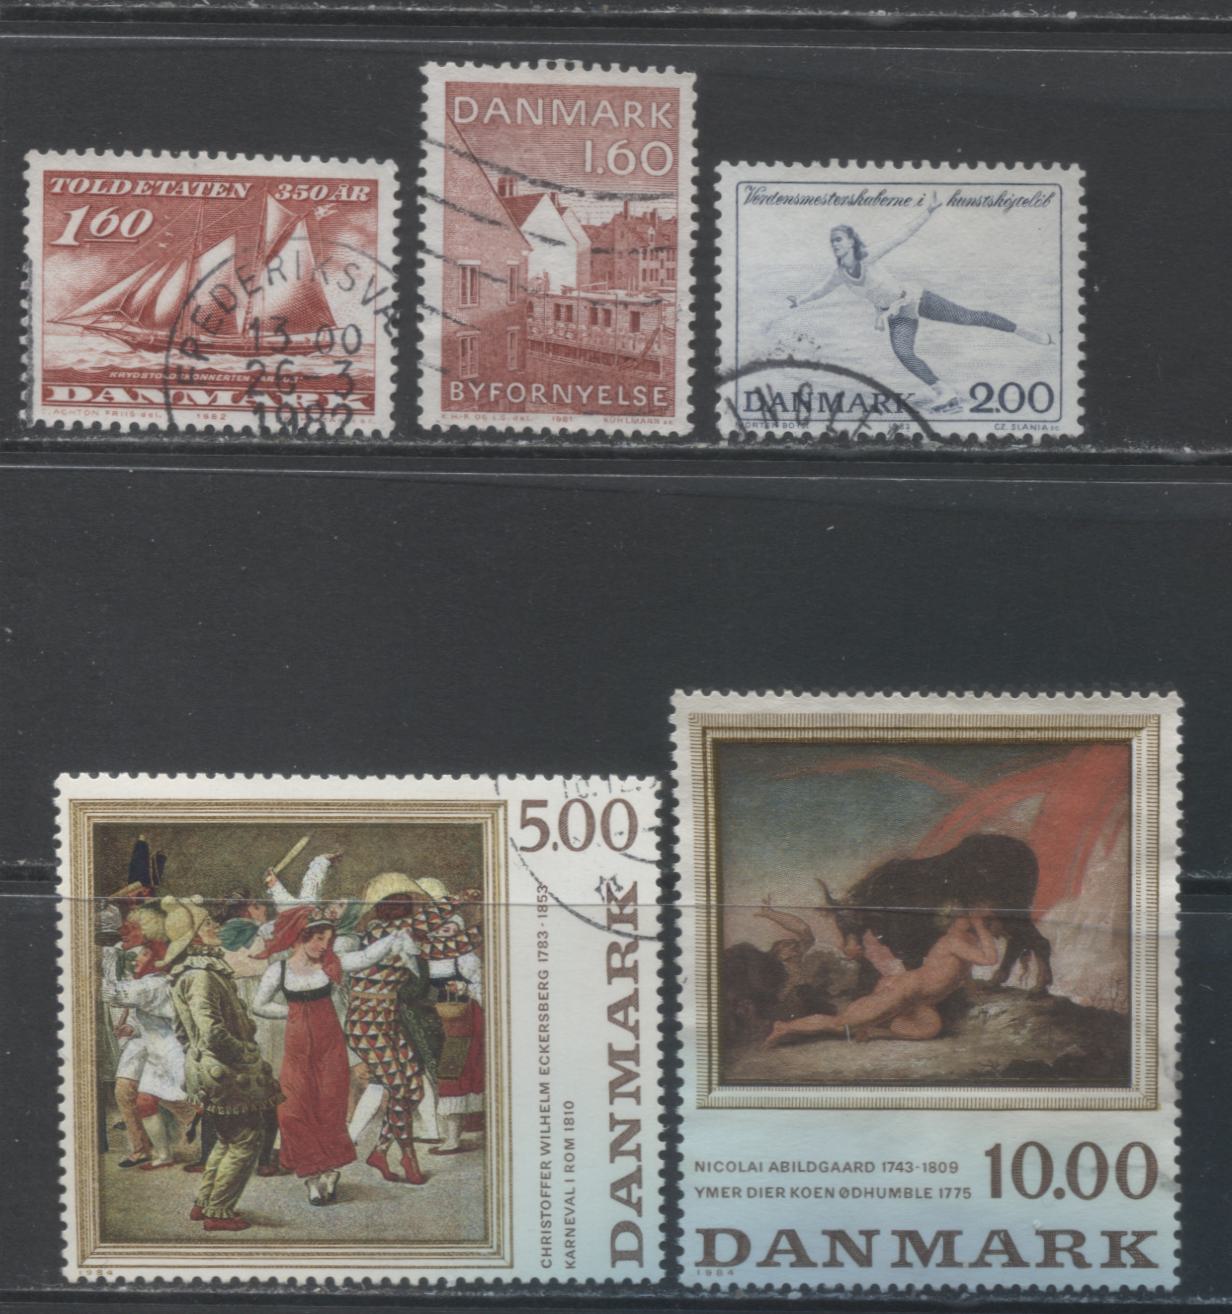 Lot 461 Denmark SC#721/768 1982-1984 Commemoratives, 46 Fine/Very Fine Used Singles, Click on Listing to See ALL Pictures, 2017 Scott Cat. $38.15 USD